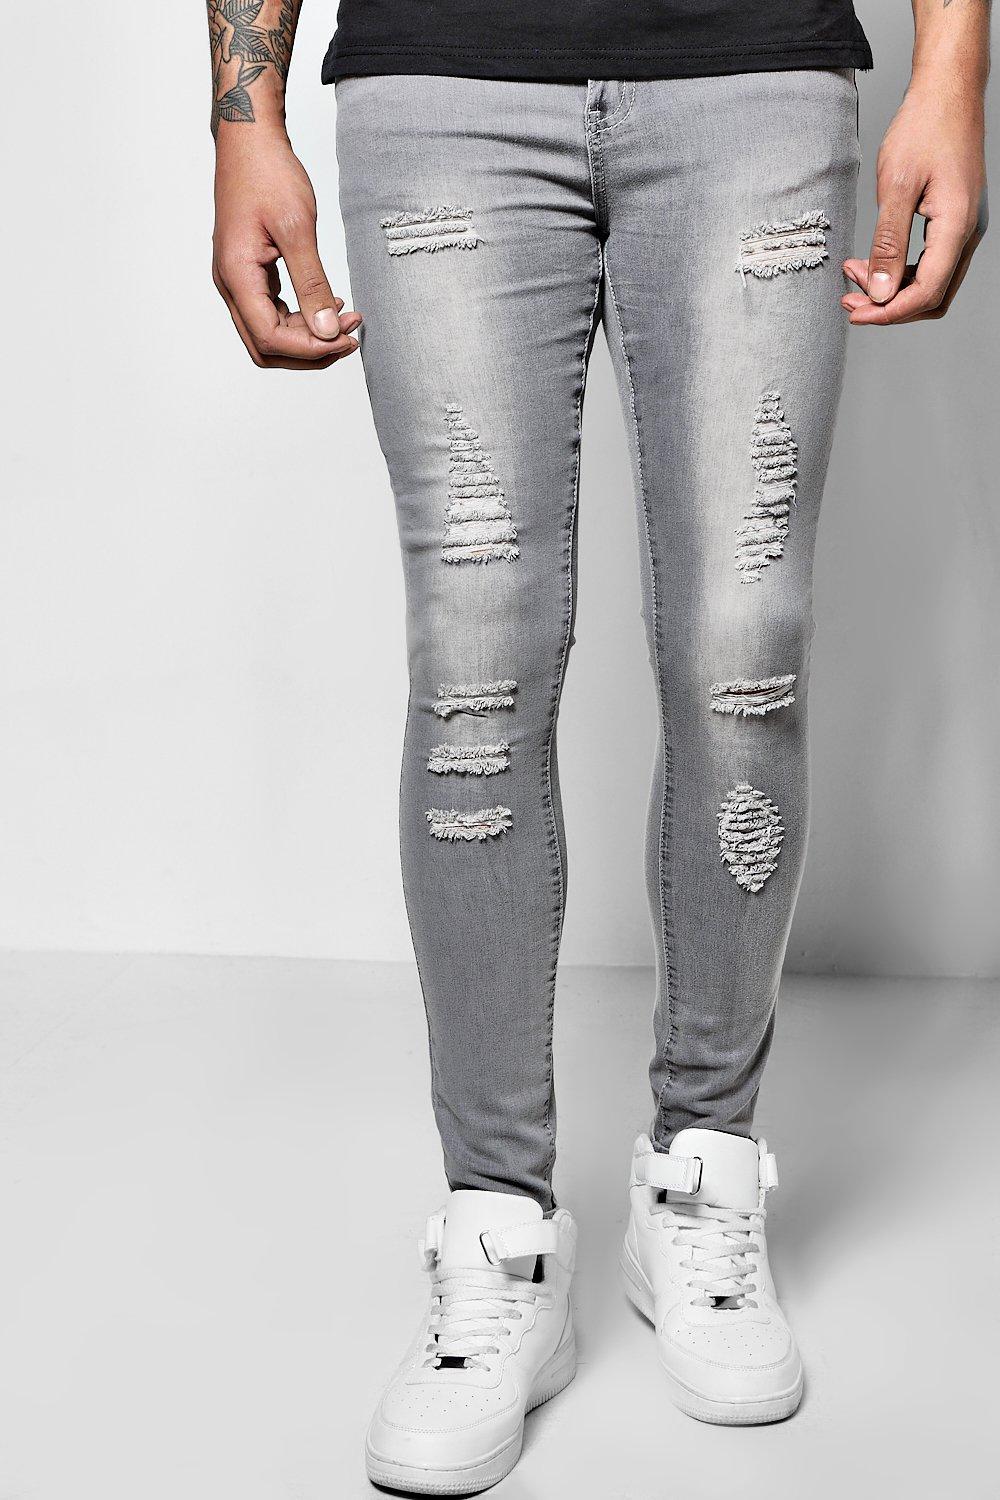 mens grey ripped jeans slim fit